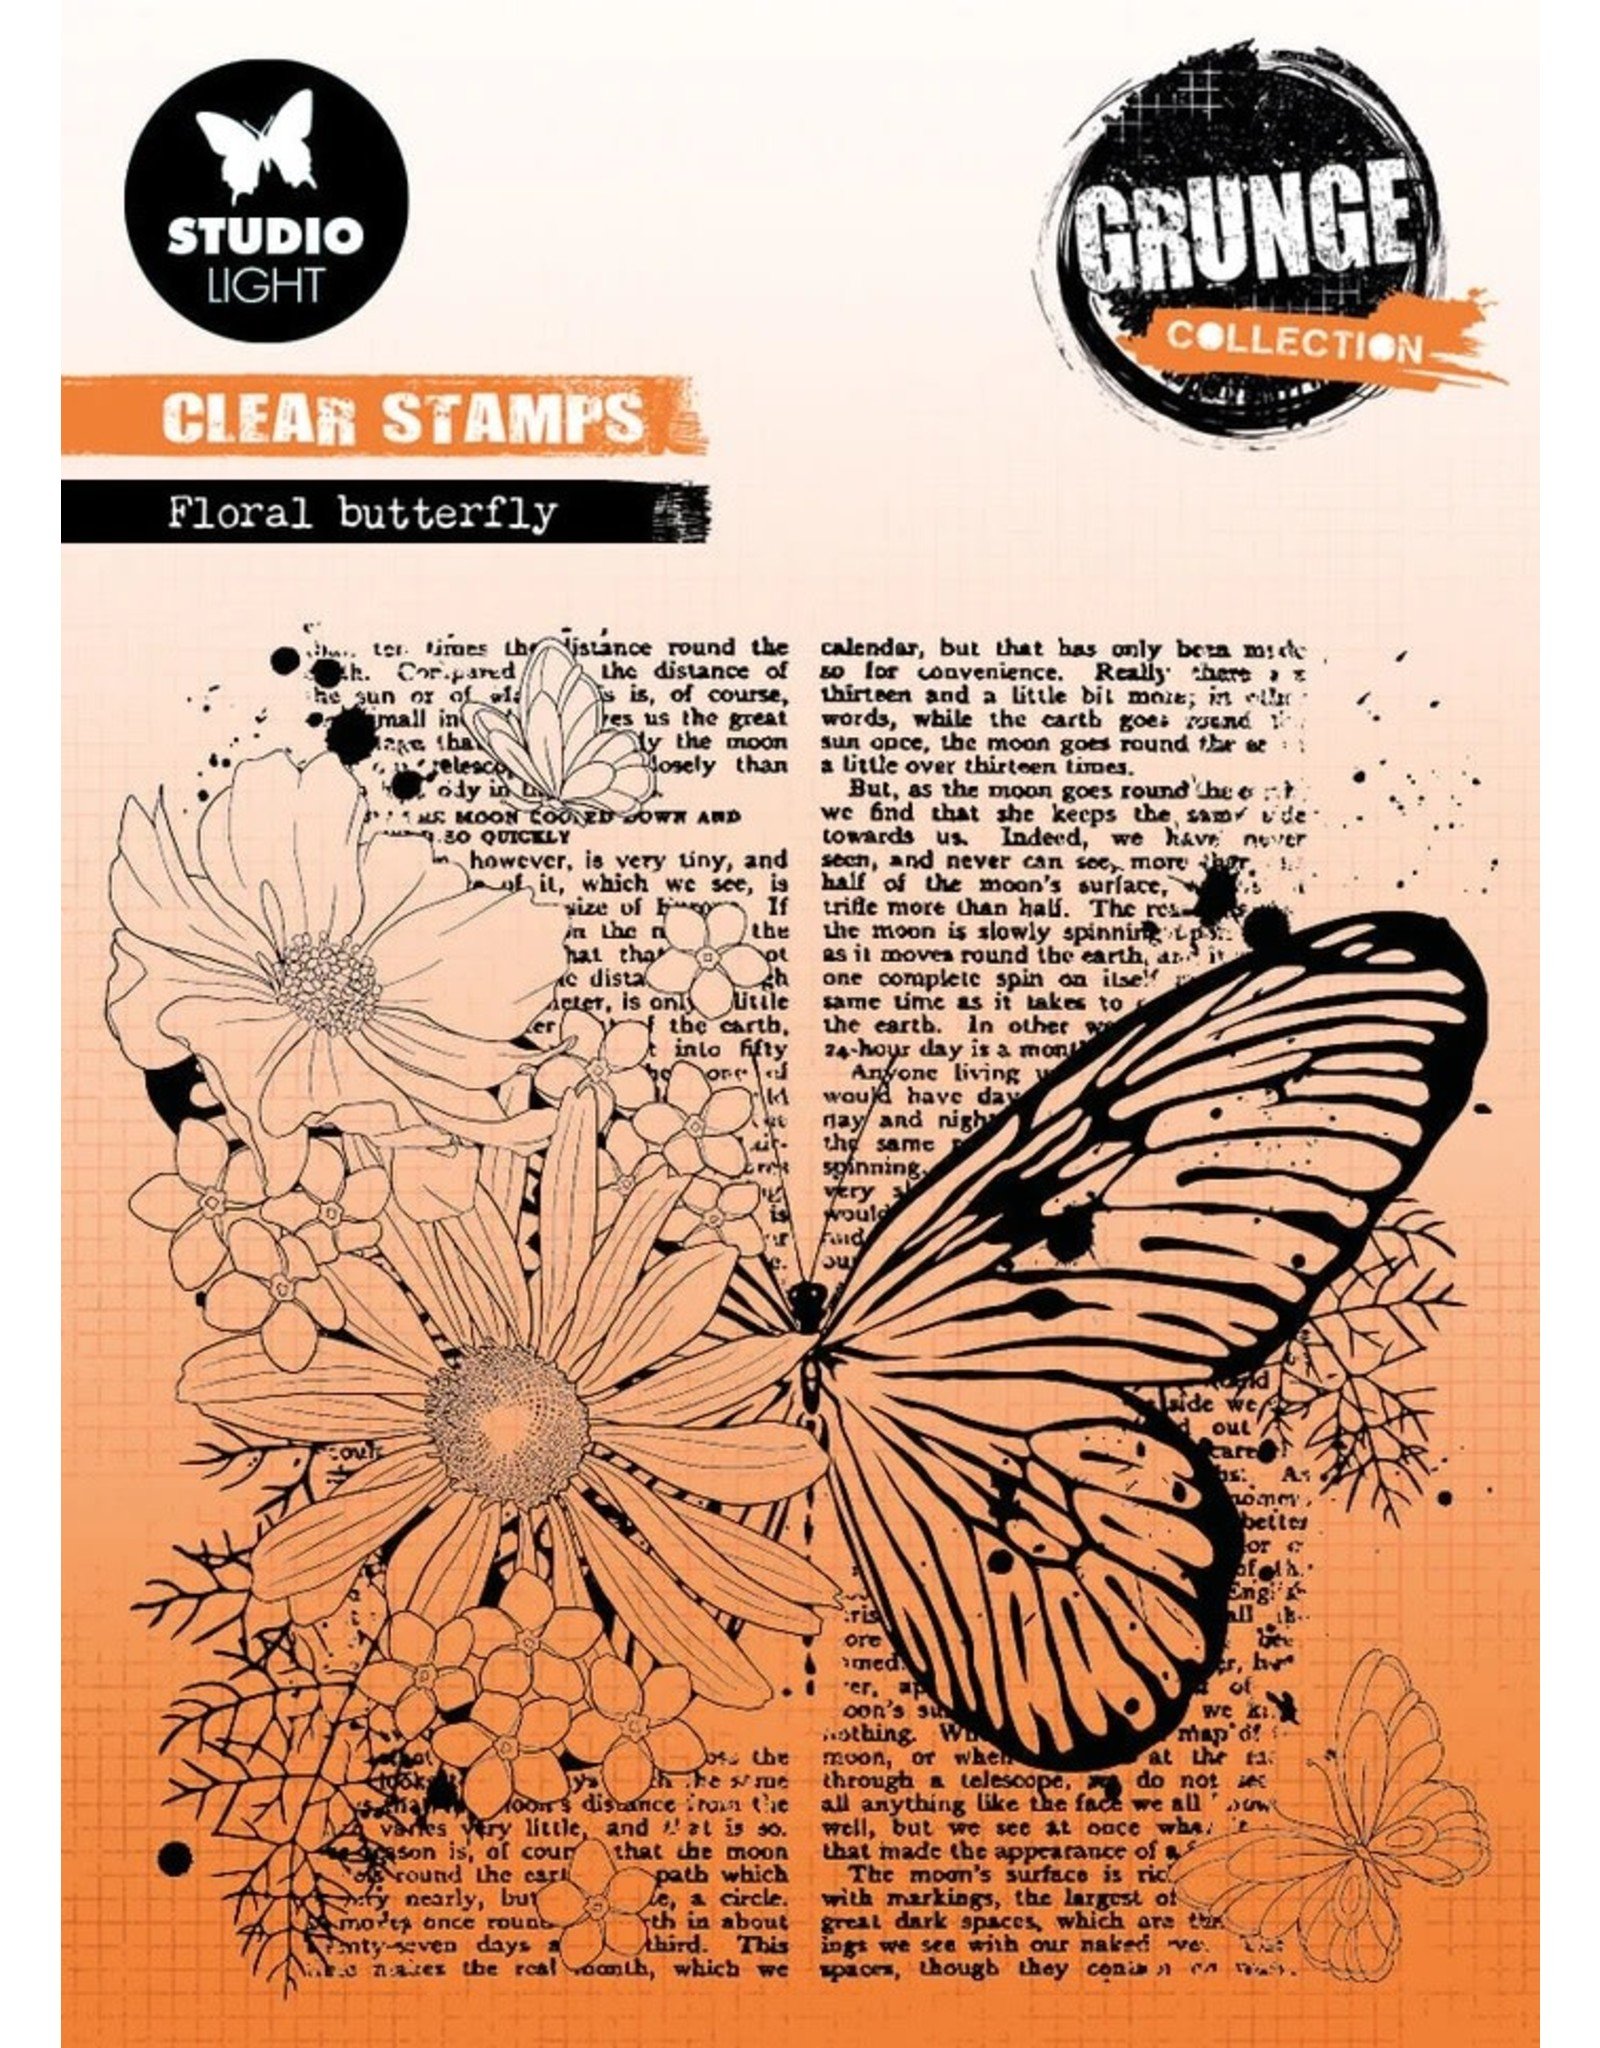 STUDIOLIGHT GRUNGE COLLECTION FLORAL BUTTERFLY CLEAR STAMP - Scrapbook  Centrale